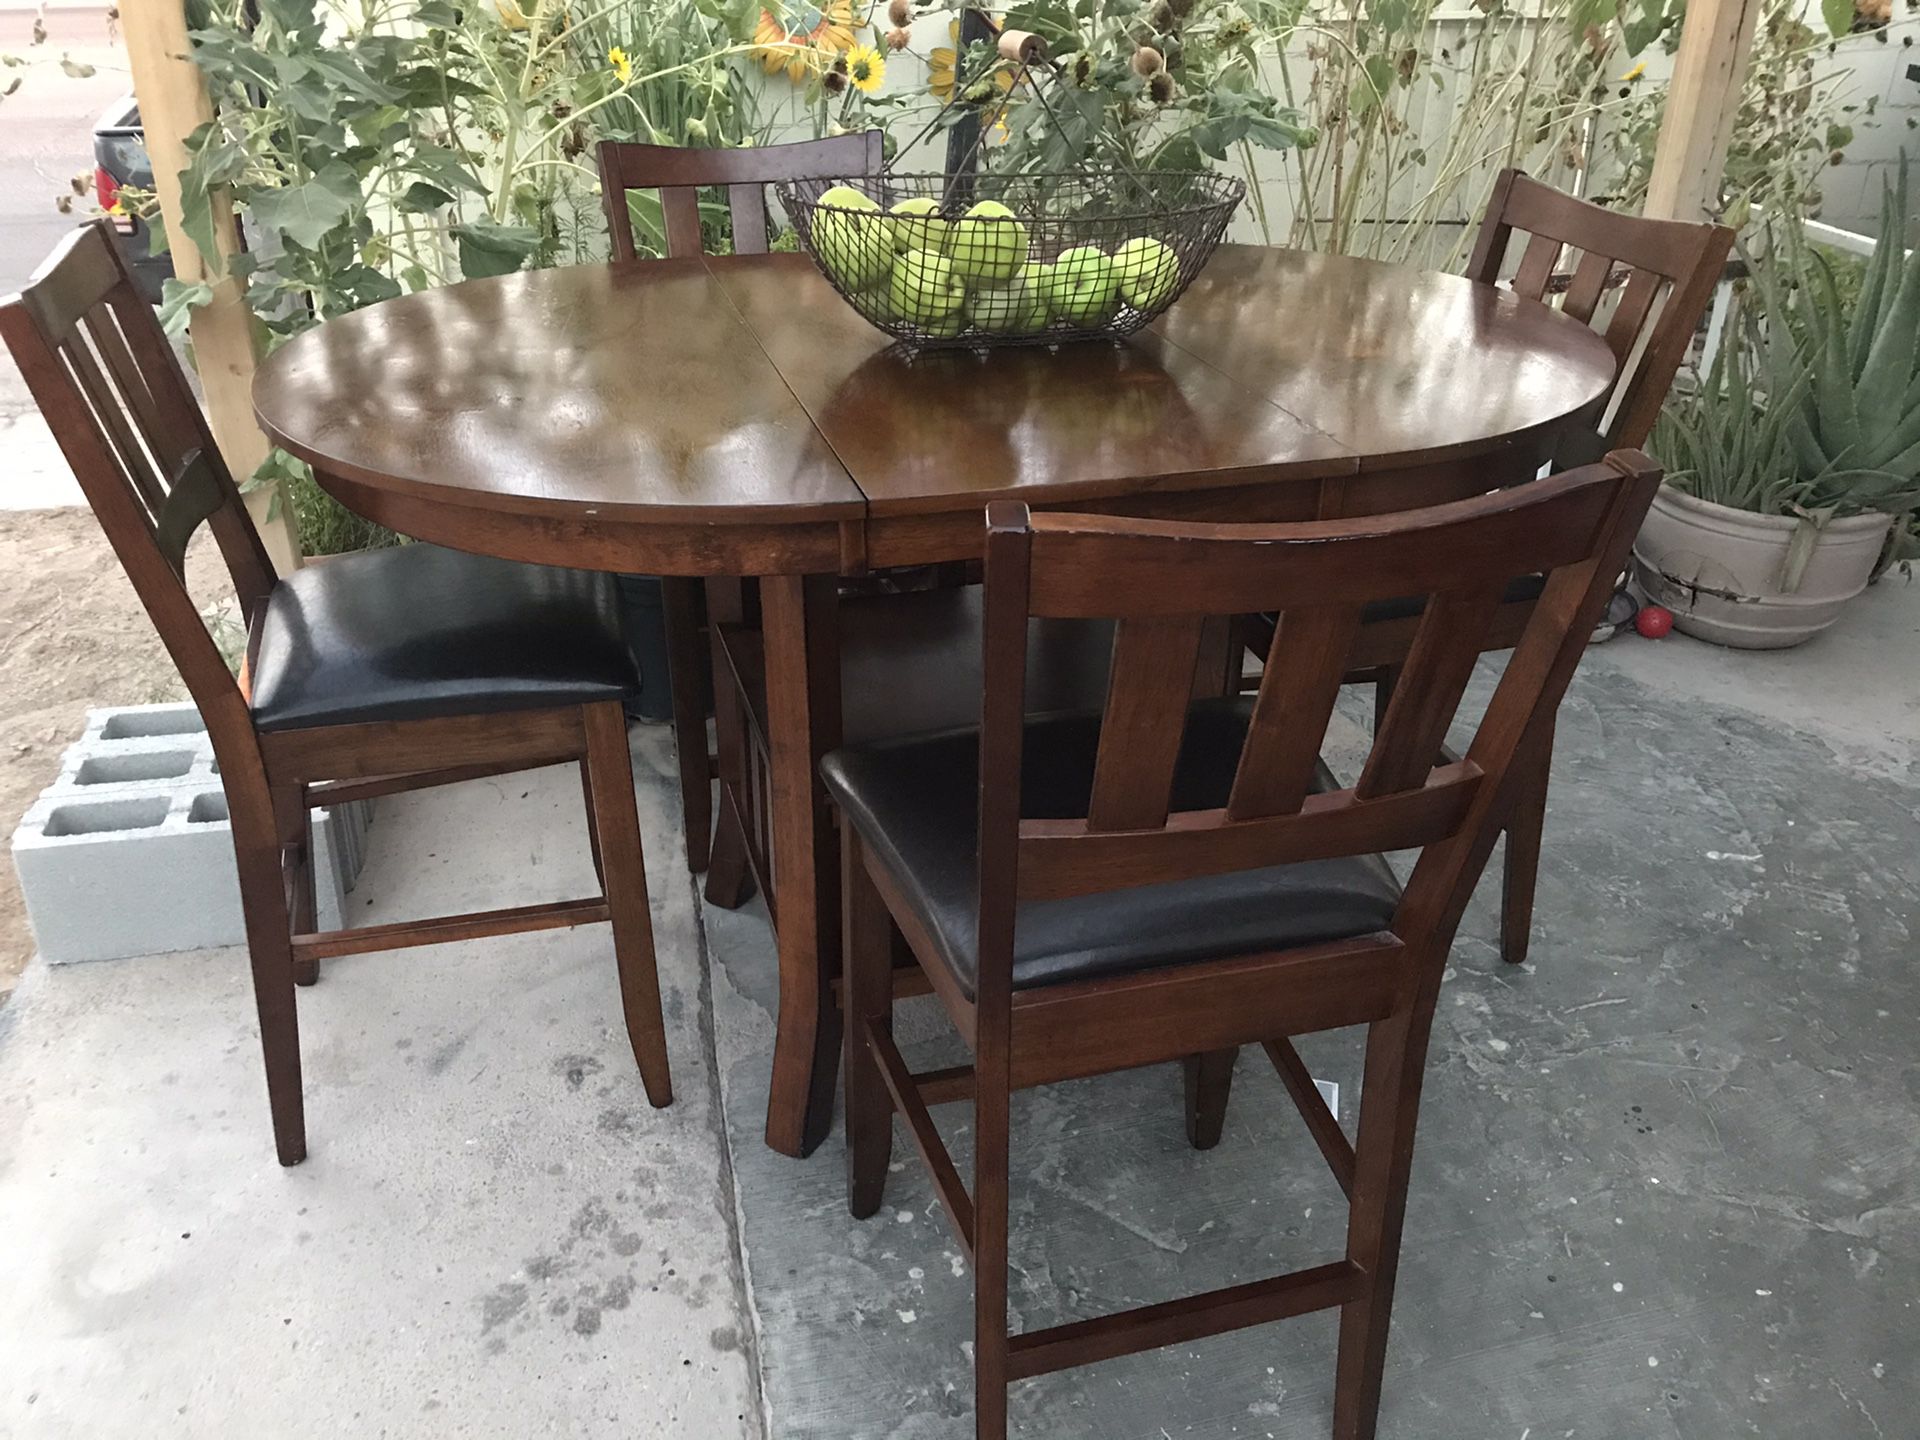 Counter height dining table set